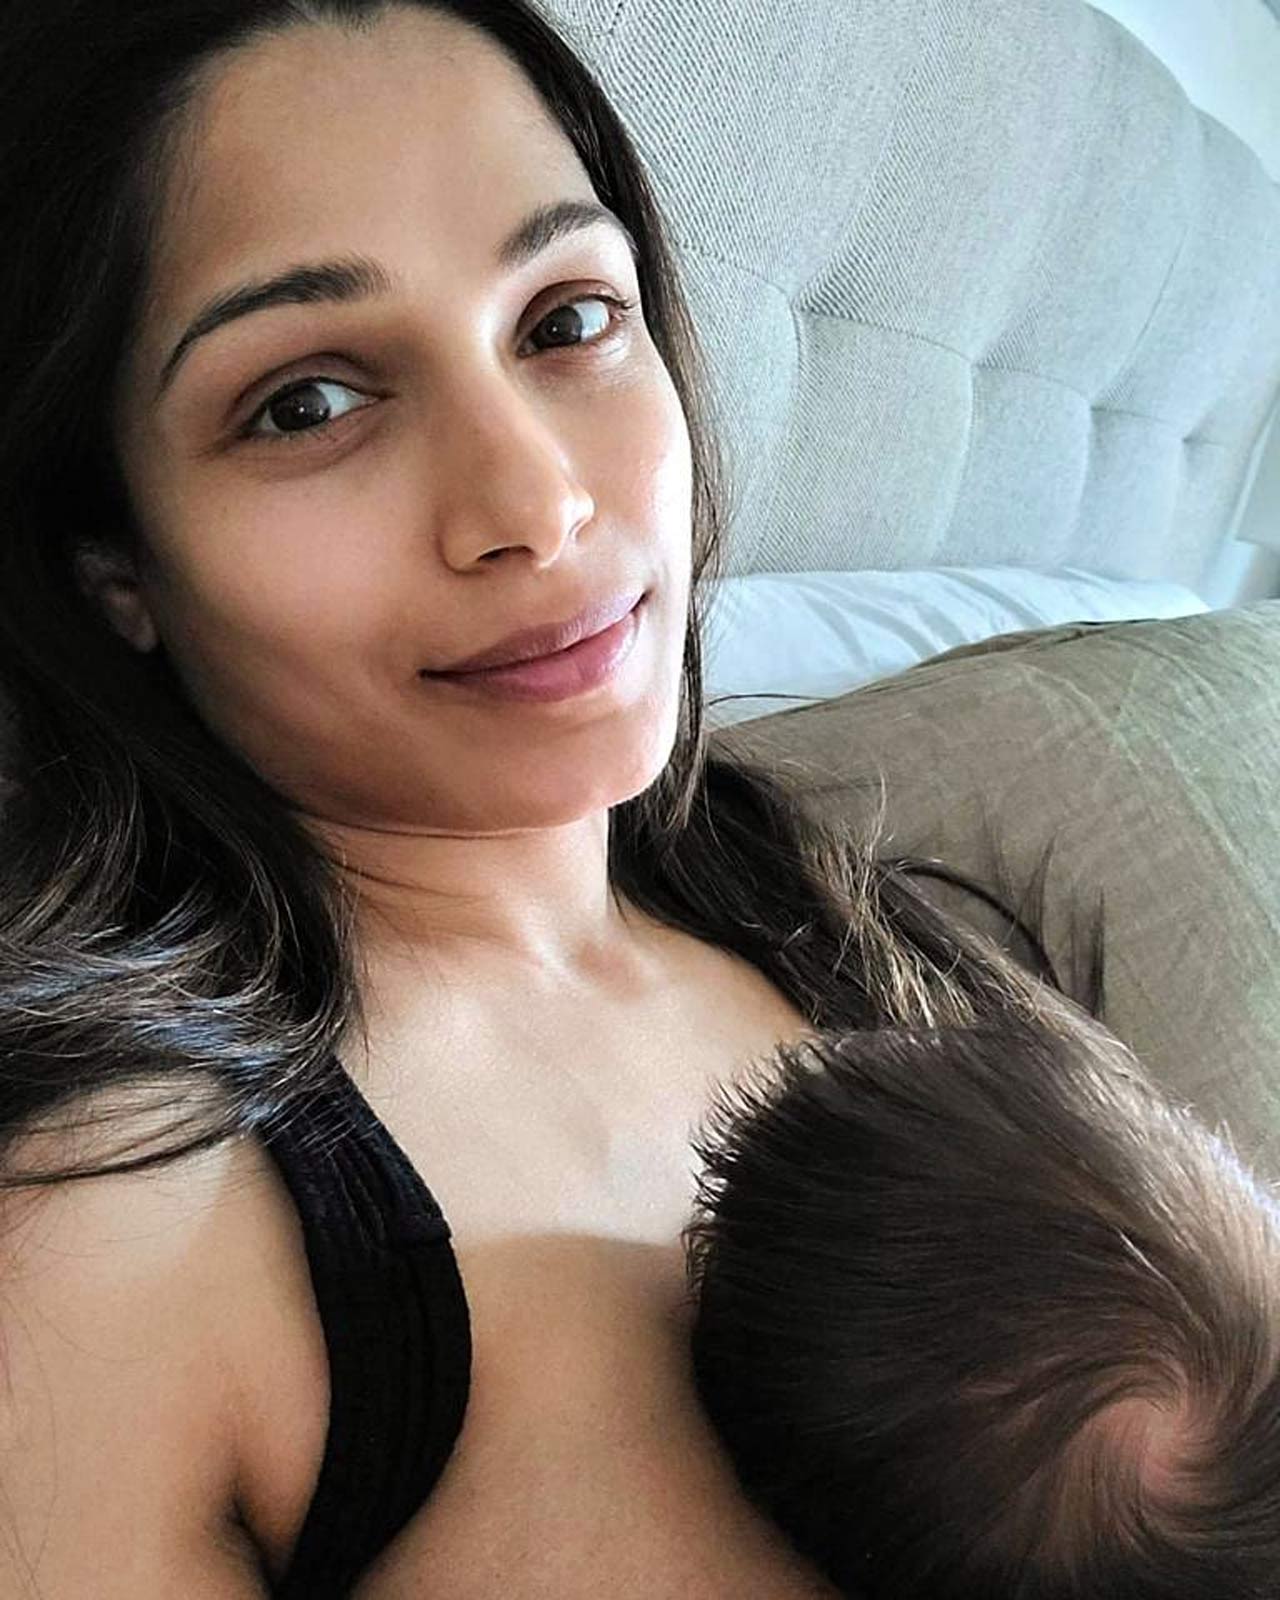 Freida Pinto tied the knot with her boyfriend Cory Tran in 2020. The couple has been tight-lipped about their personal life, but they shared this news on social media, where the Slumdog Millionaire actress was seen highlighting her baby bump. Sharing this beautiful picture, the actress wrote a long note on post-partum, and its effects on new mothers.